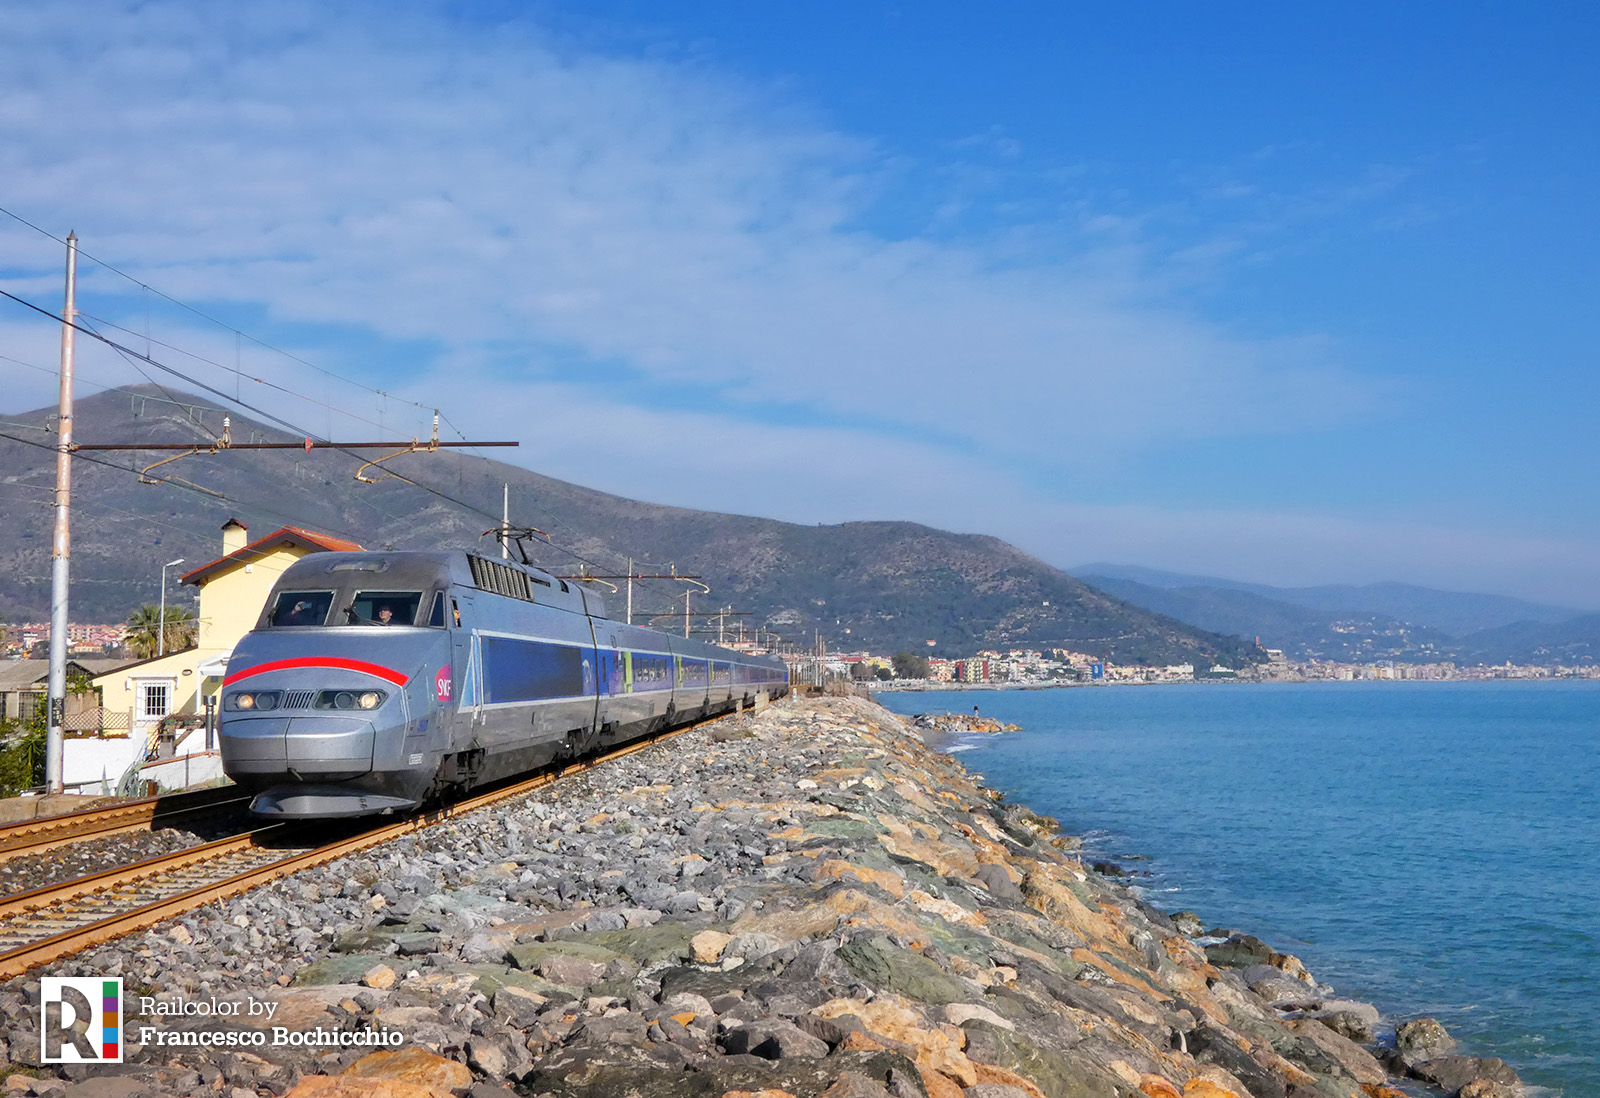 It In The Picture Tgv Reseau By The Sea In Italy Railcolor News